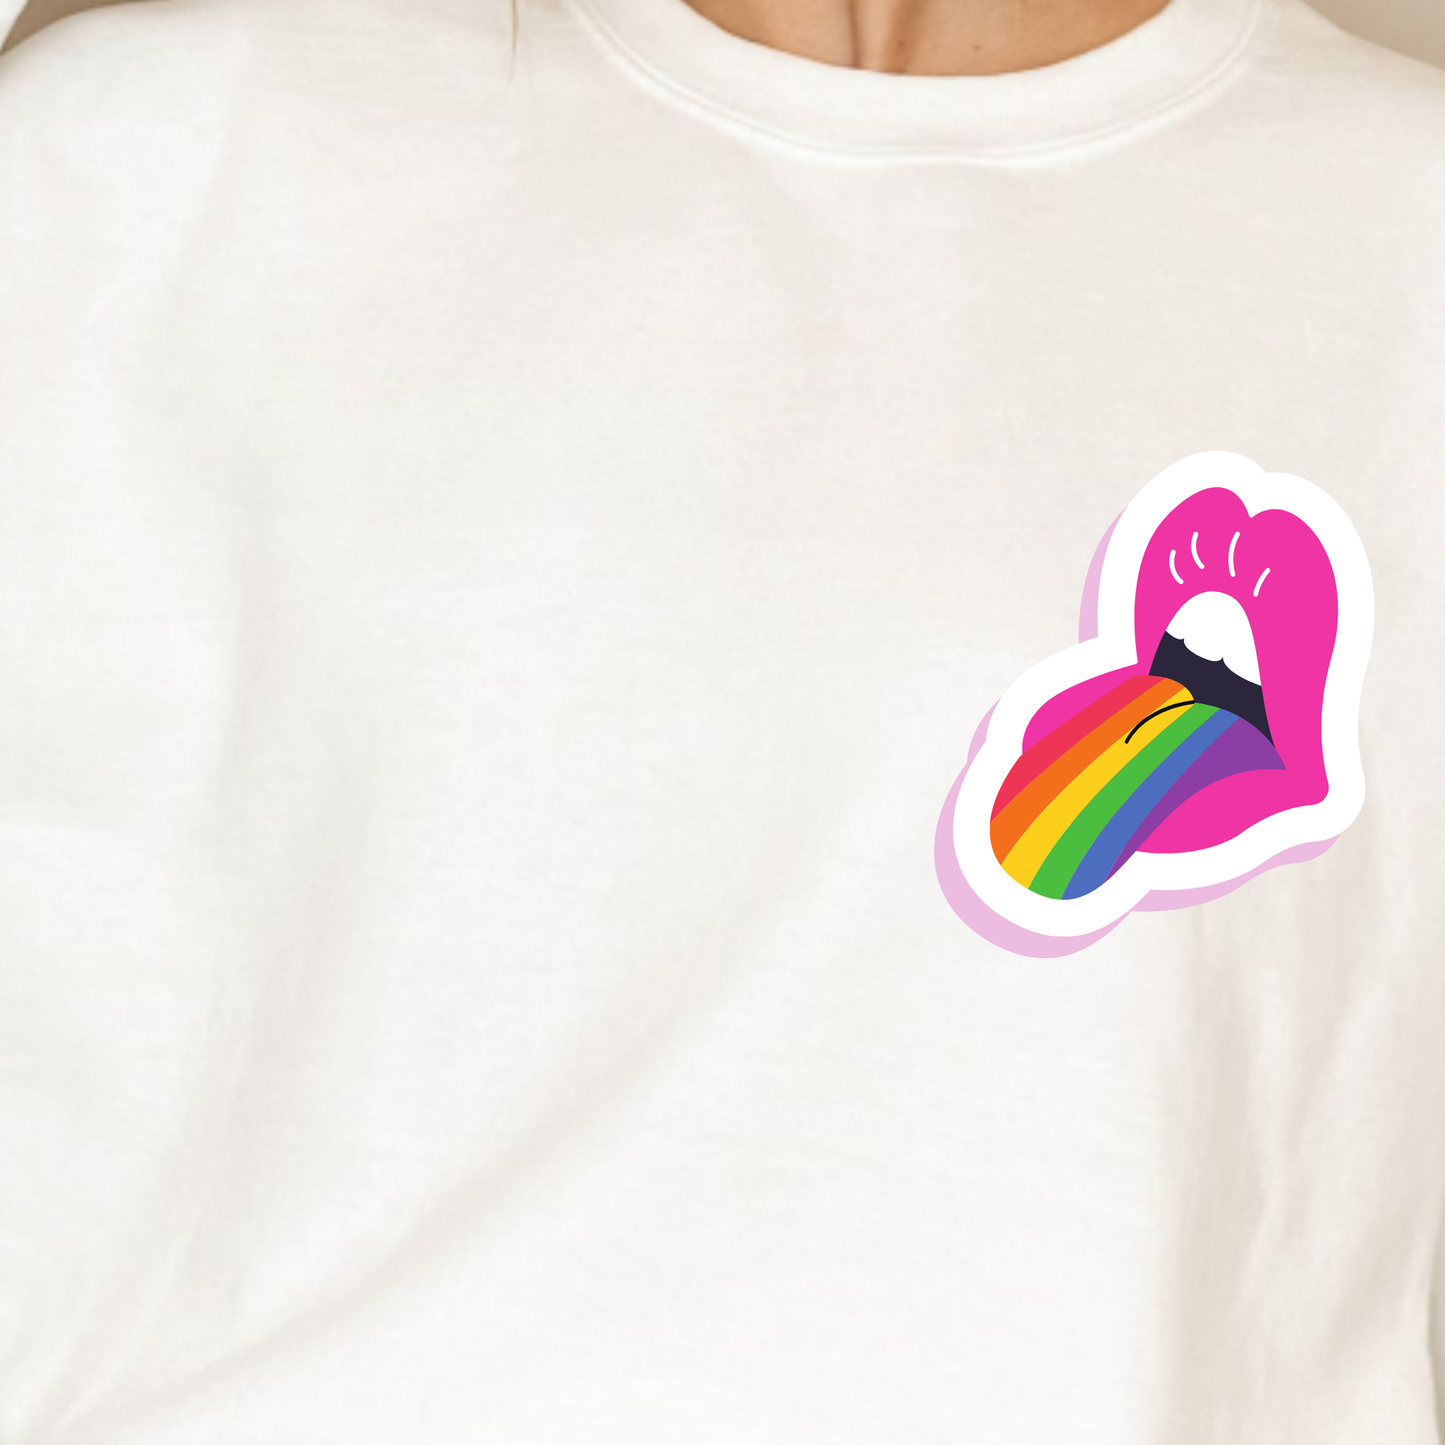 (Shirt not included) Rainbow Tongue out + Pocket - Clear Film Transfer